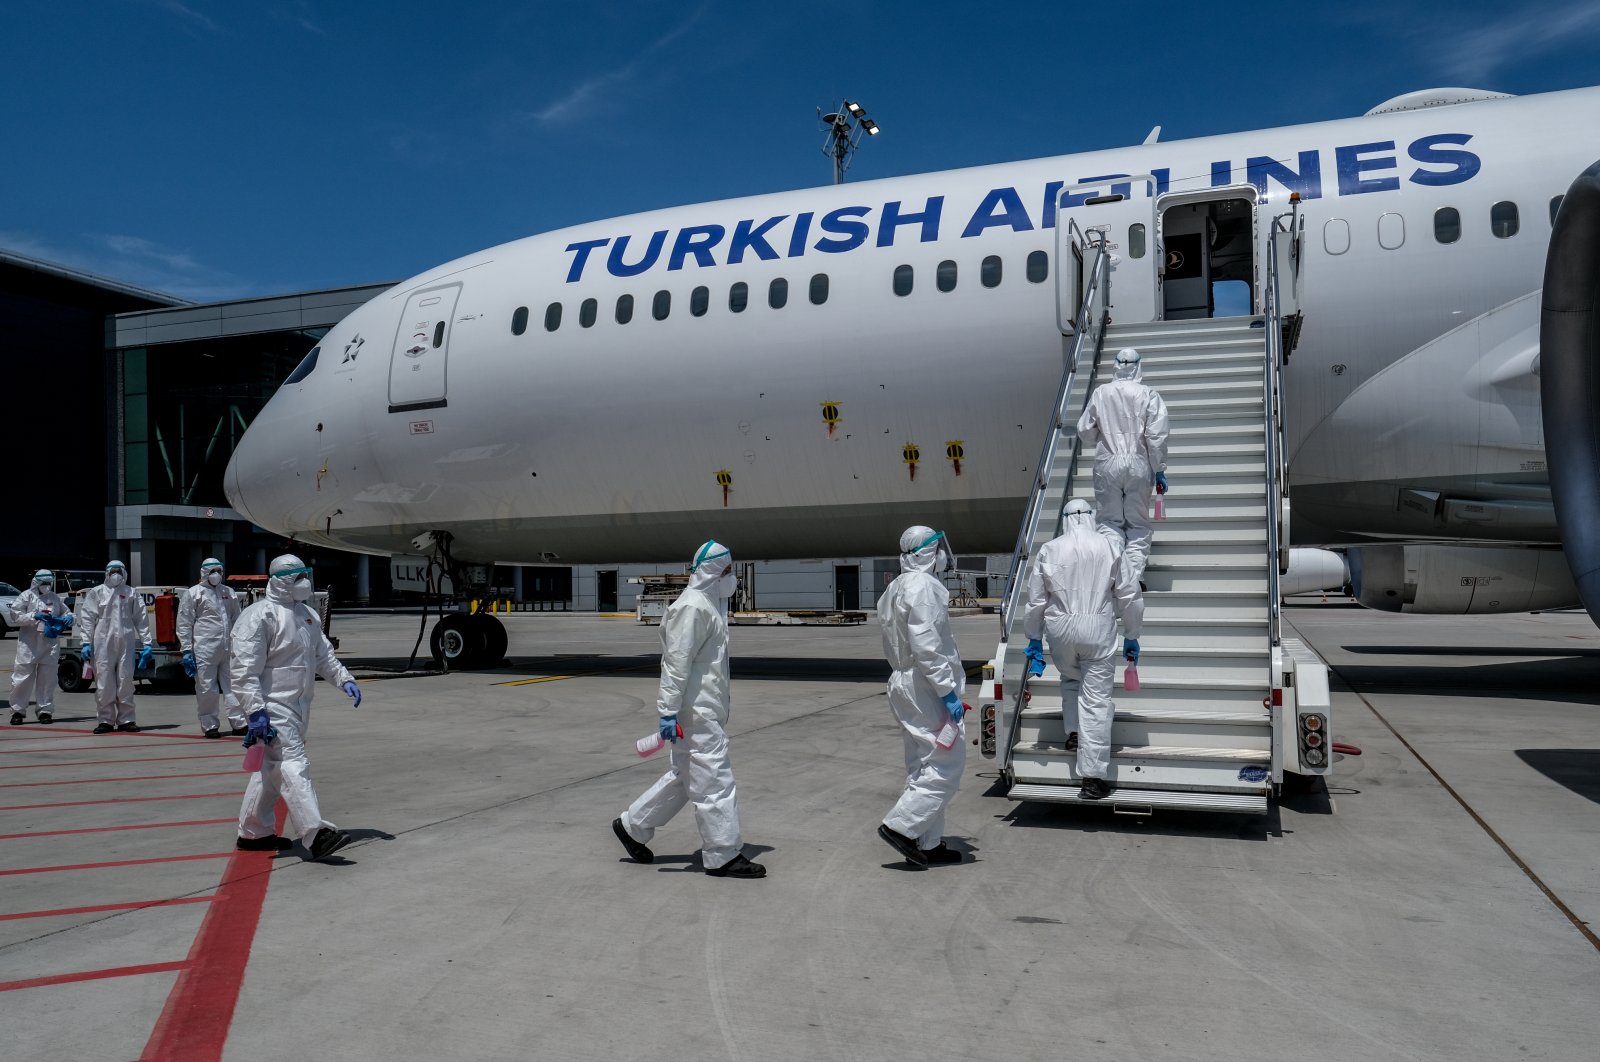 Workers enter a Turkish Airlines plane for disinfection in Istanbul, Turkey, June 2, 2020. (PHOTO BY UĞUR YILDIRIM)